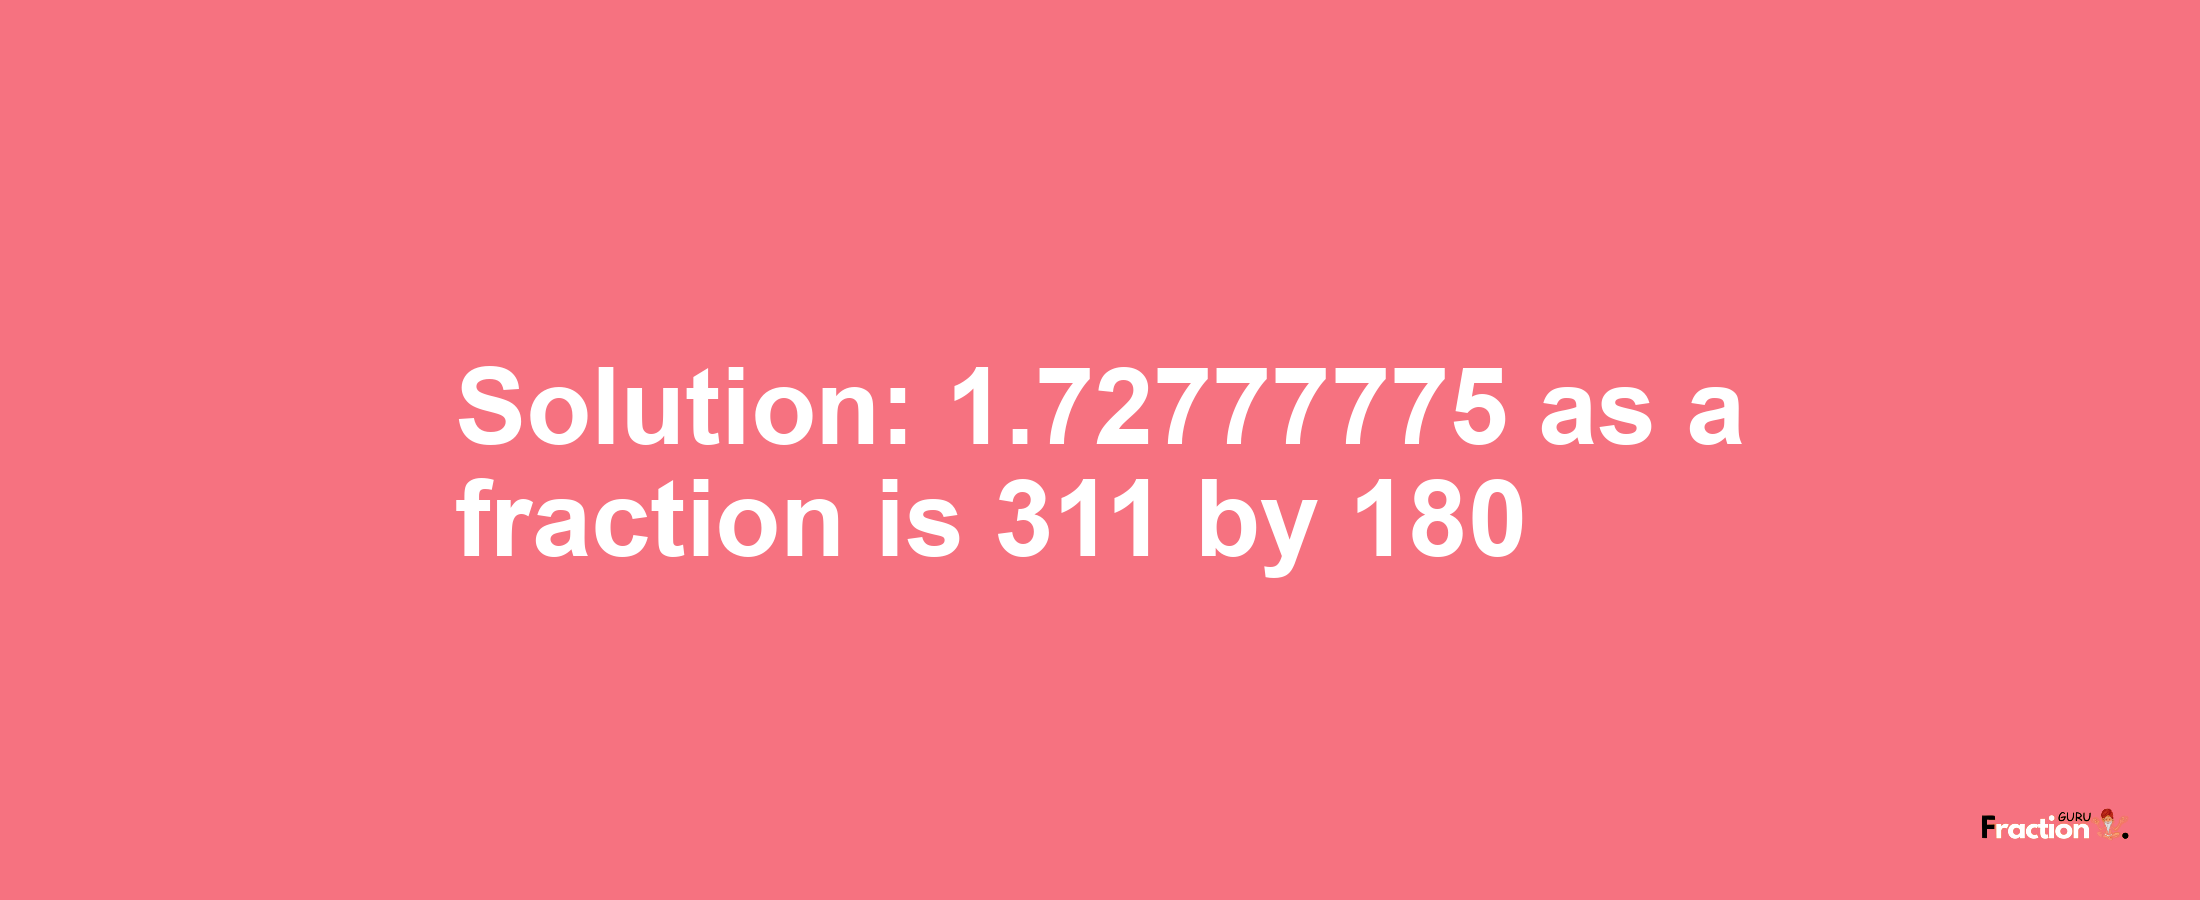 Solution:1.72777775 as a fraction is 311/180